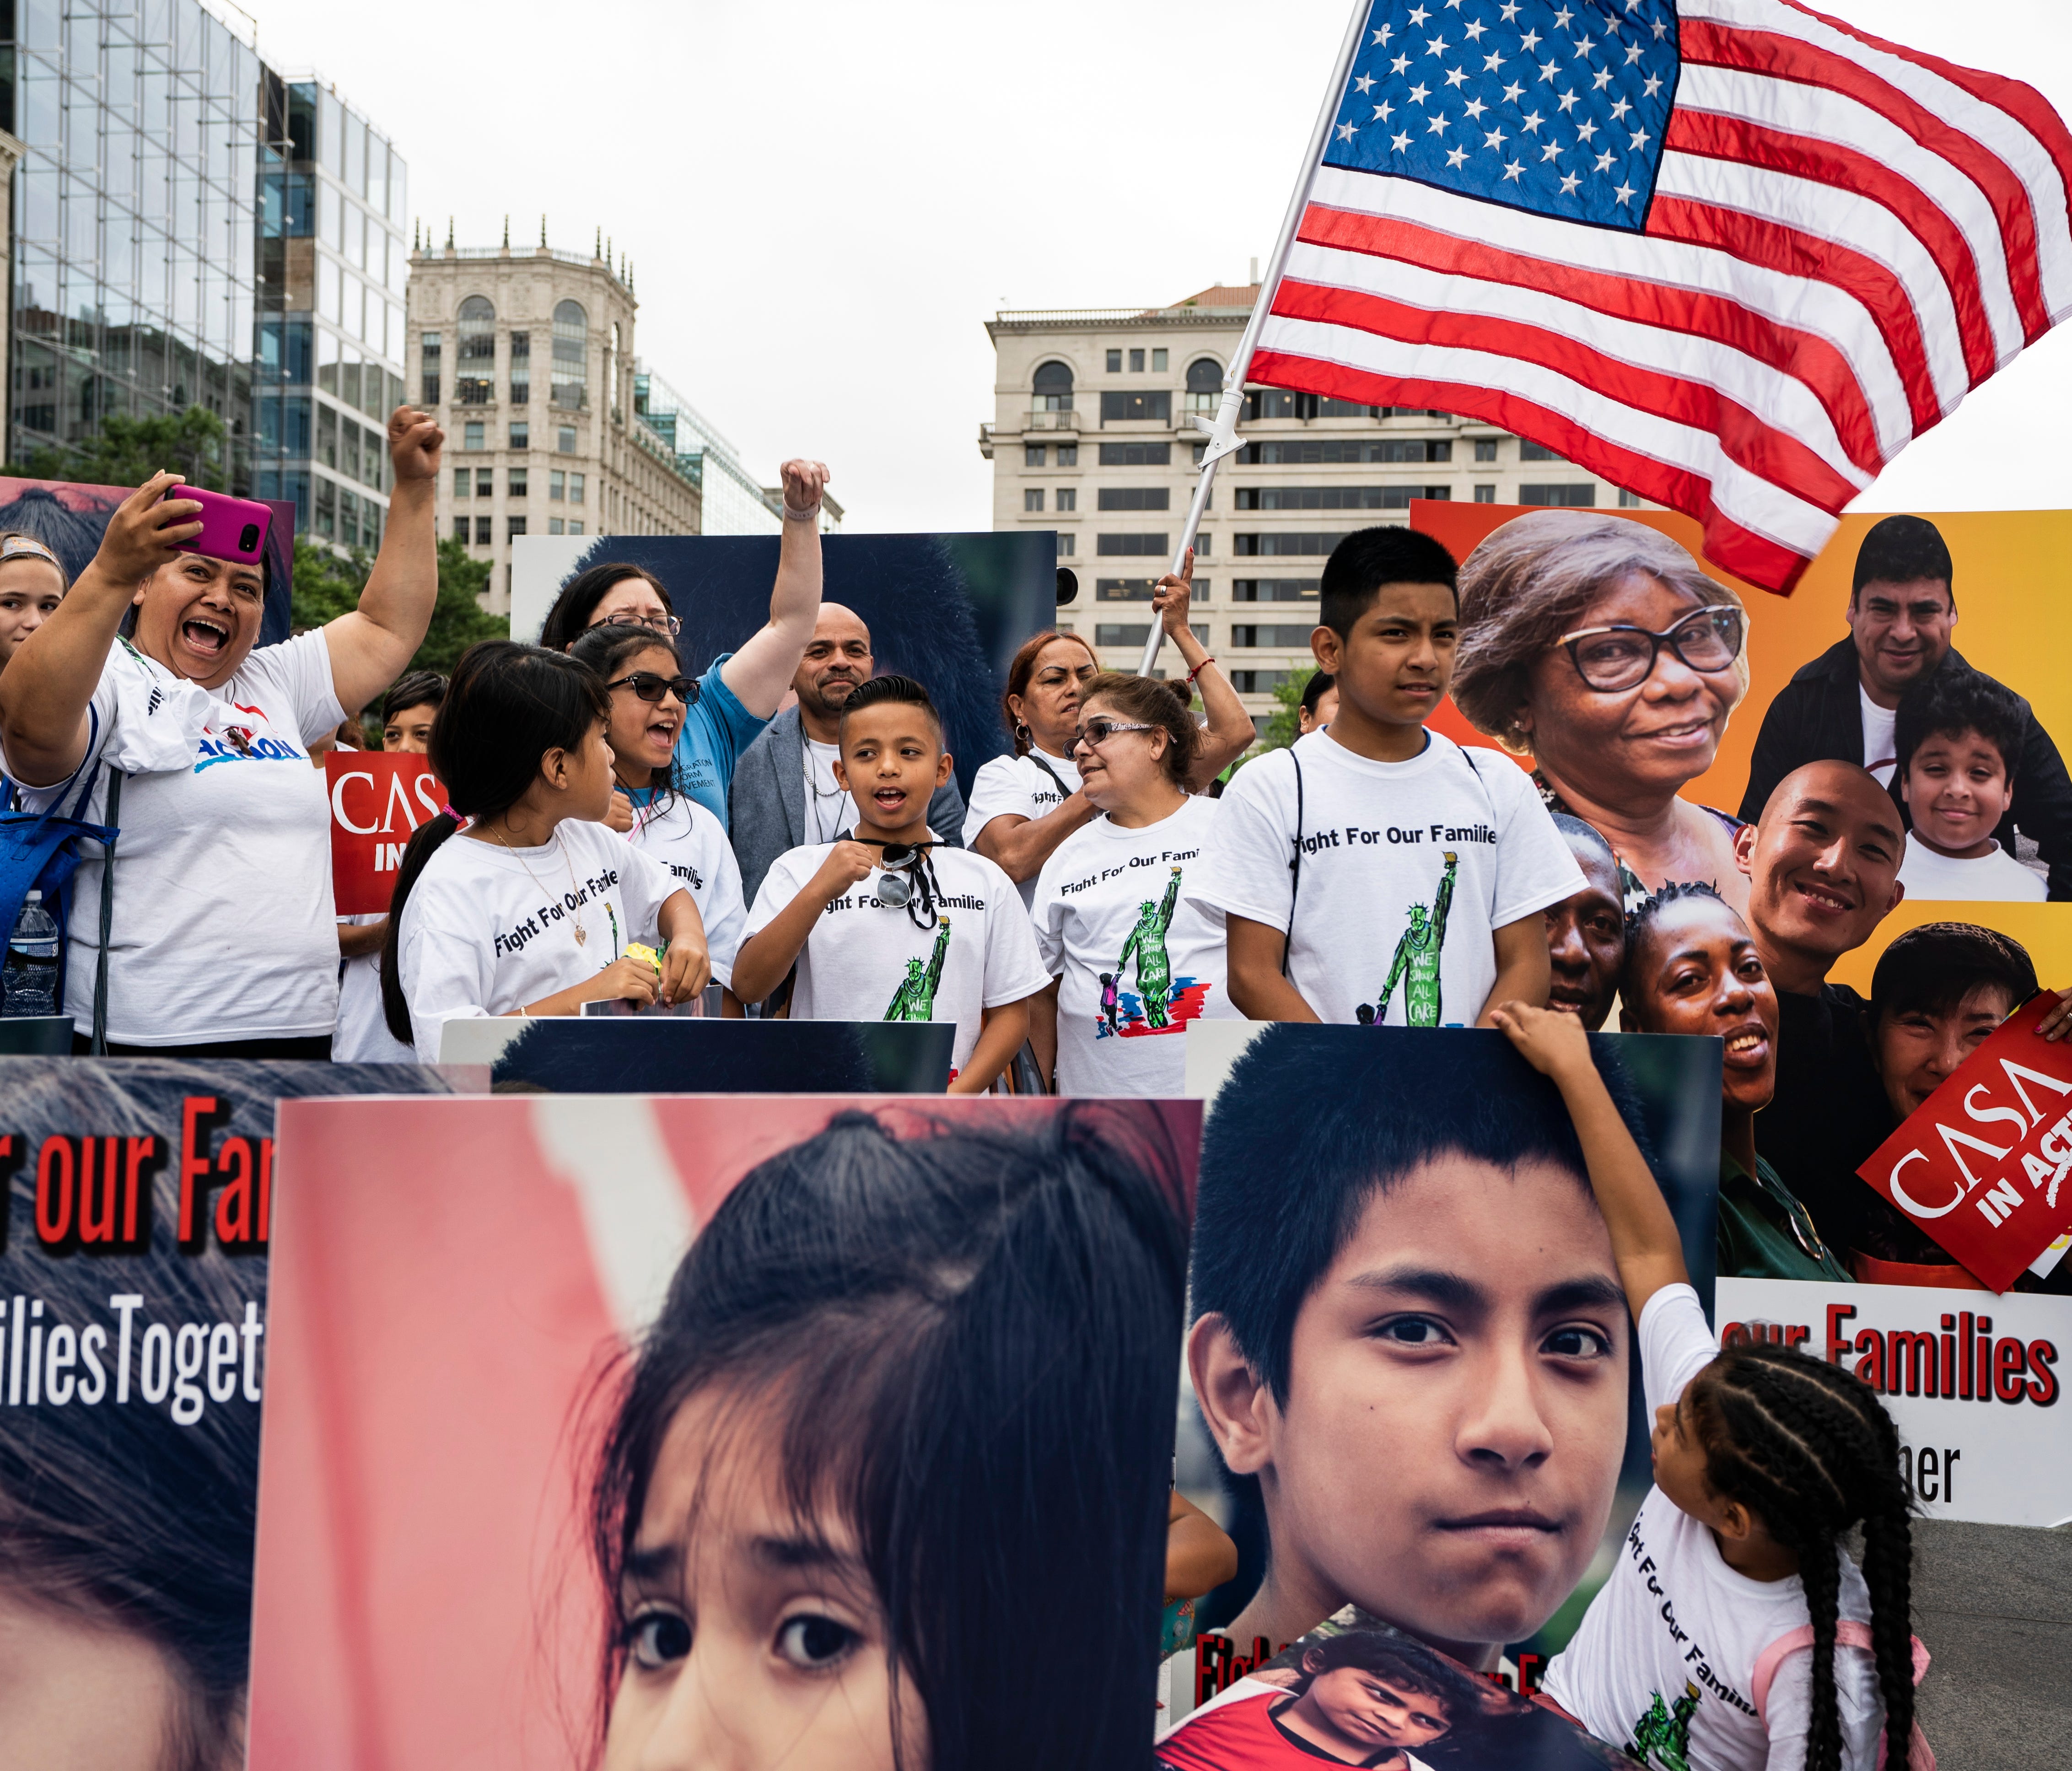 CASA in Action and the Fair Immigration Reform Movement (FIRM) hold a rally to 'demand protections for the men, women and children separated at the border as a direct result of Trump's 'zero tolerance' policy at Freedom Plaza in Washington, D.C., on 